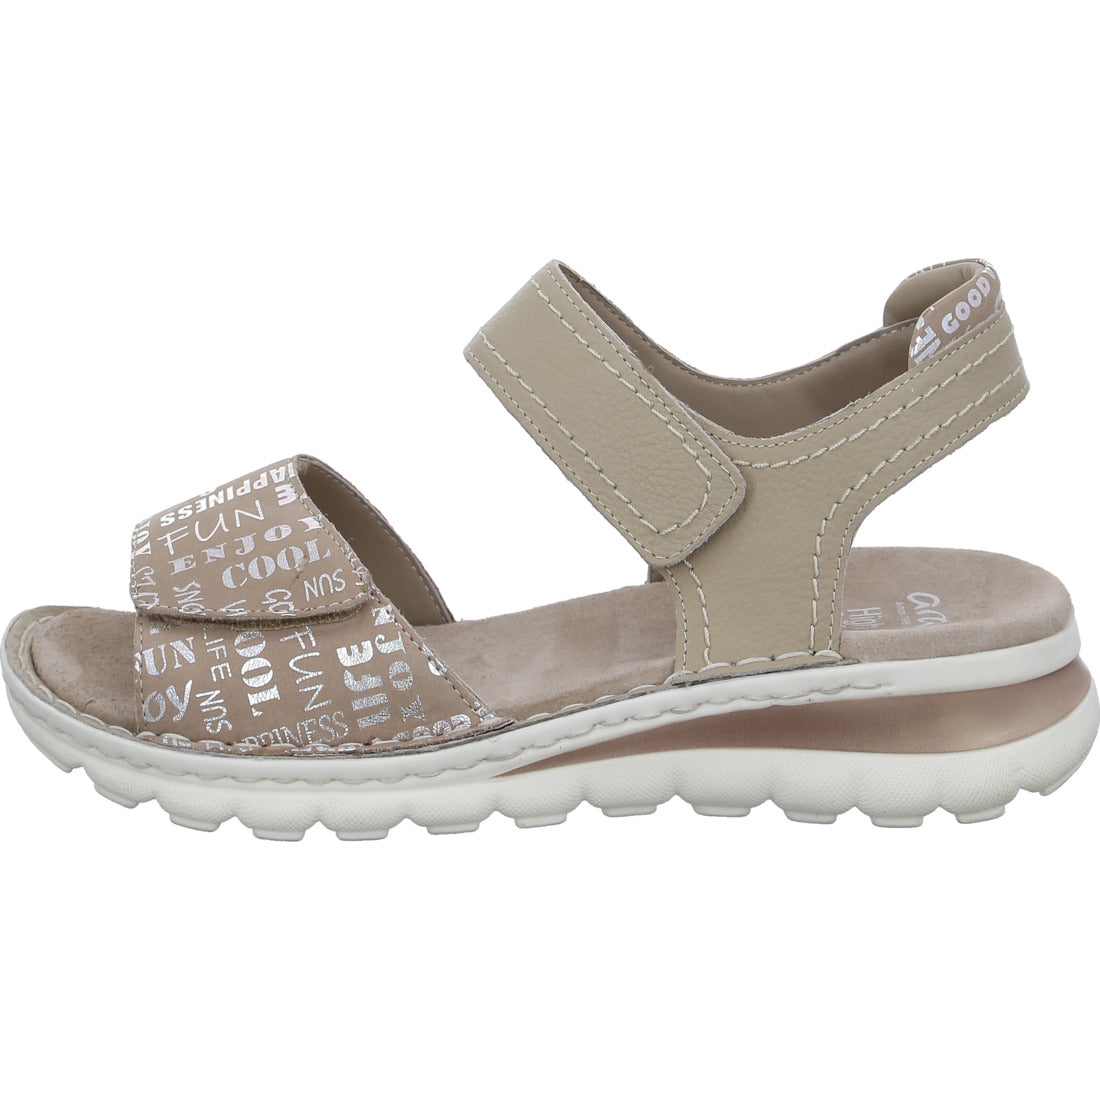 Ara 12-47209 08 G Fit Sand Beige Velcro Sandals with Slingback Strap